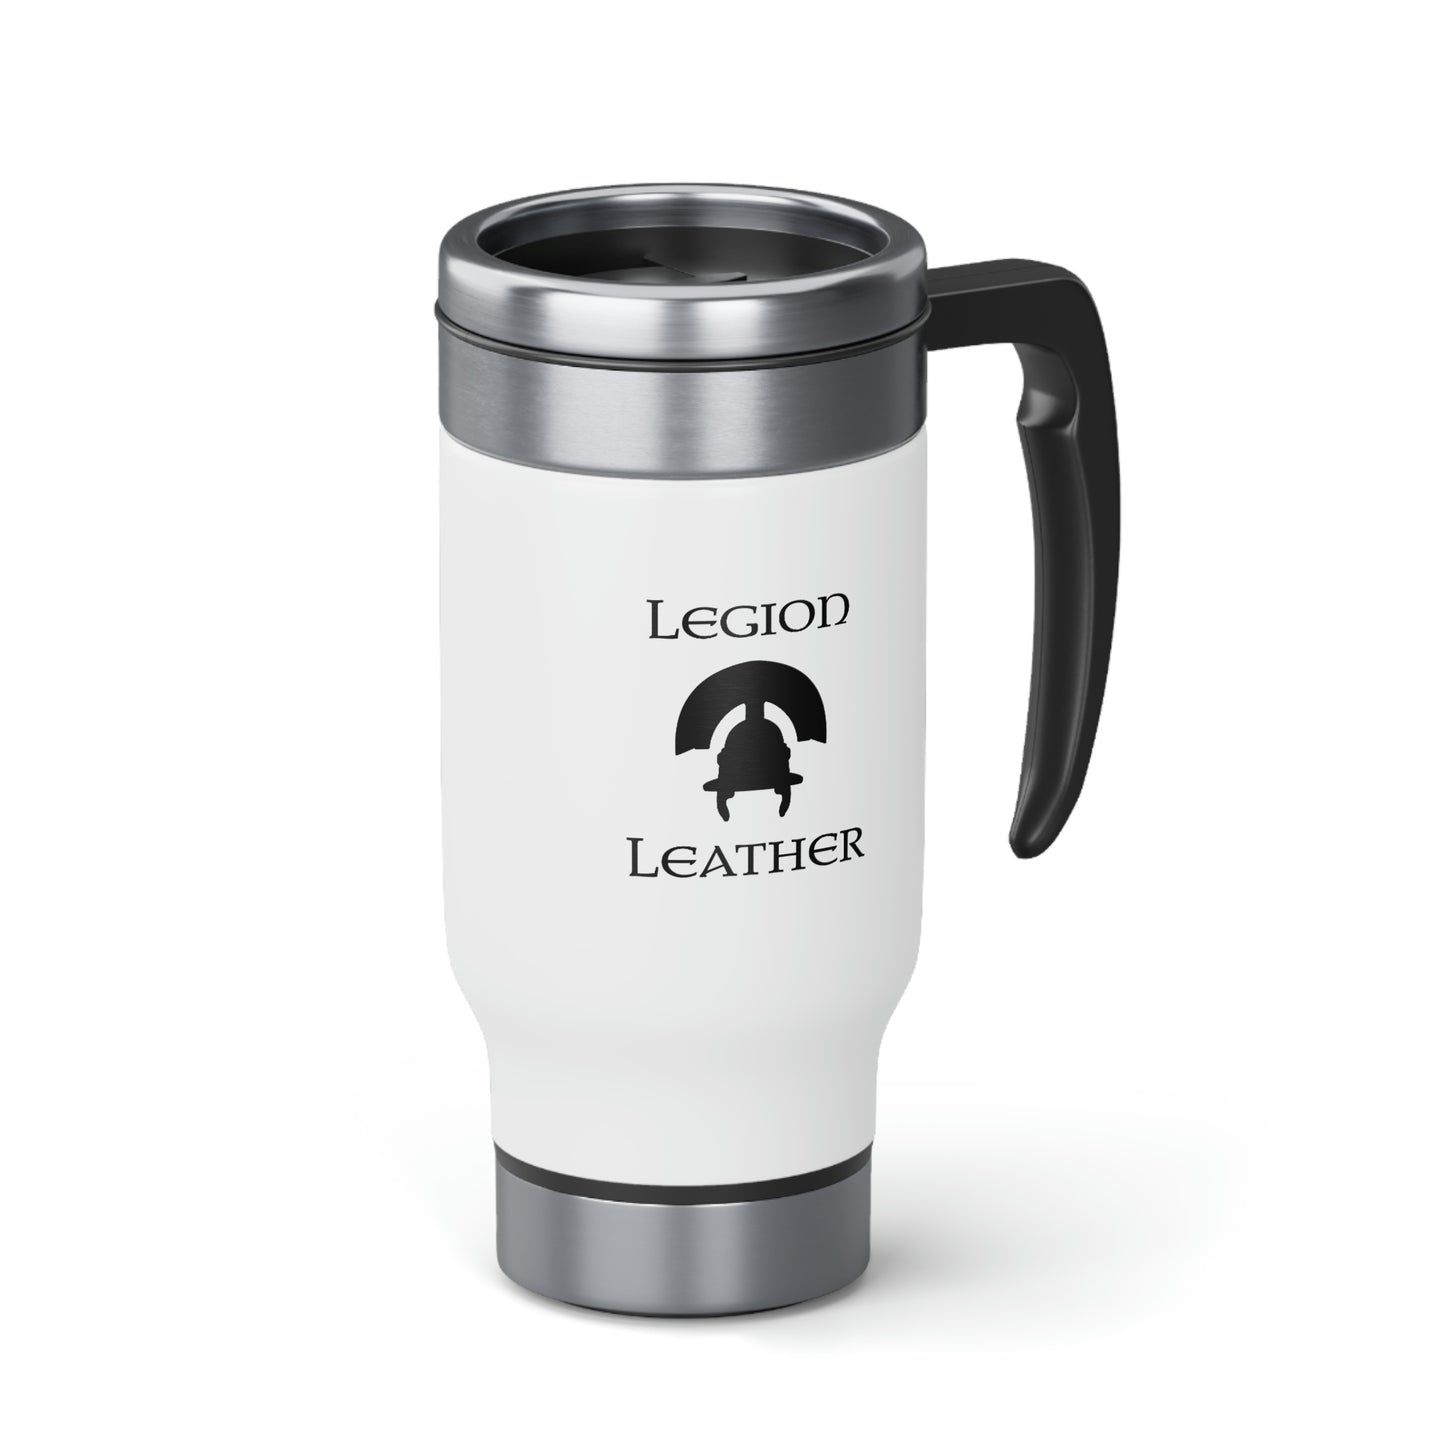 Legion Leather Stainless Steel Travel Mug with Handle, 14oz